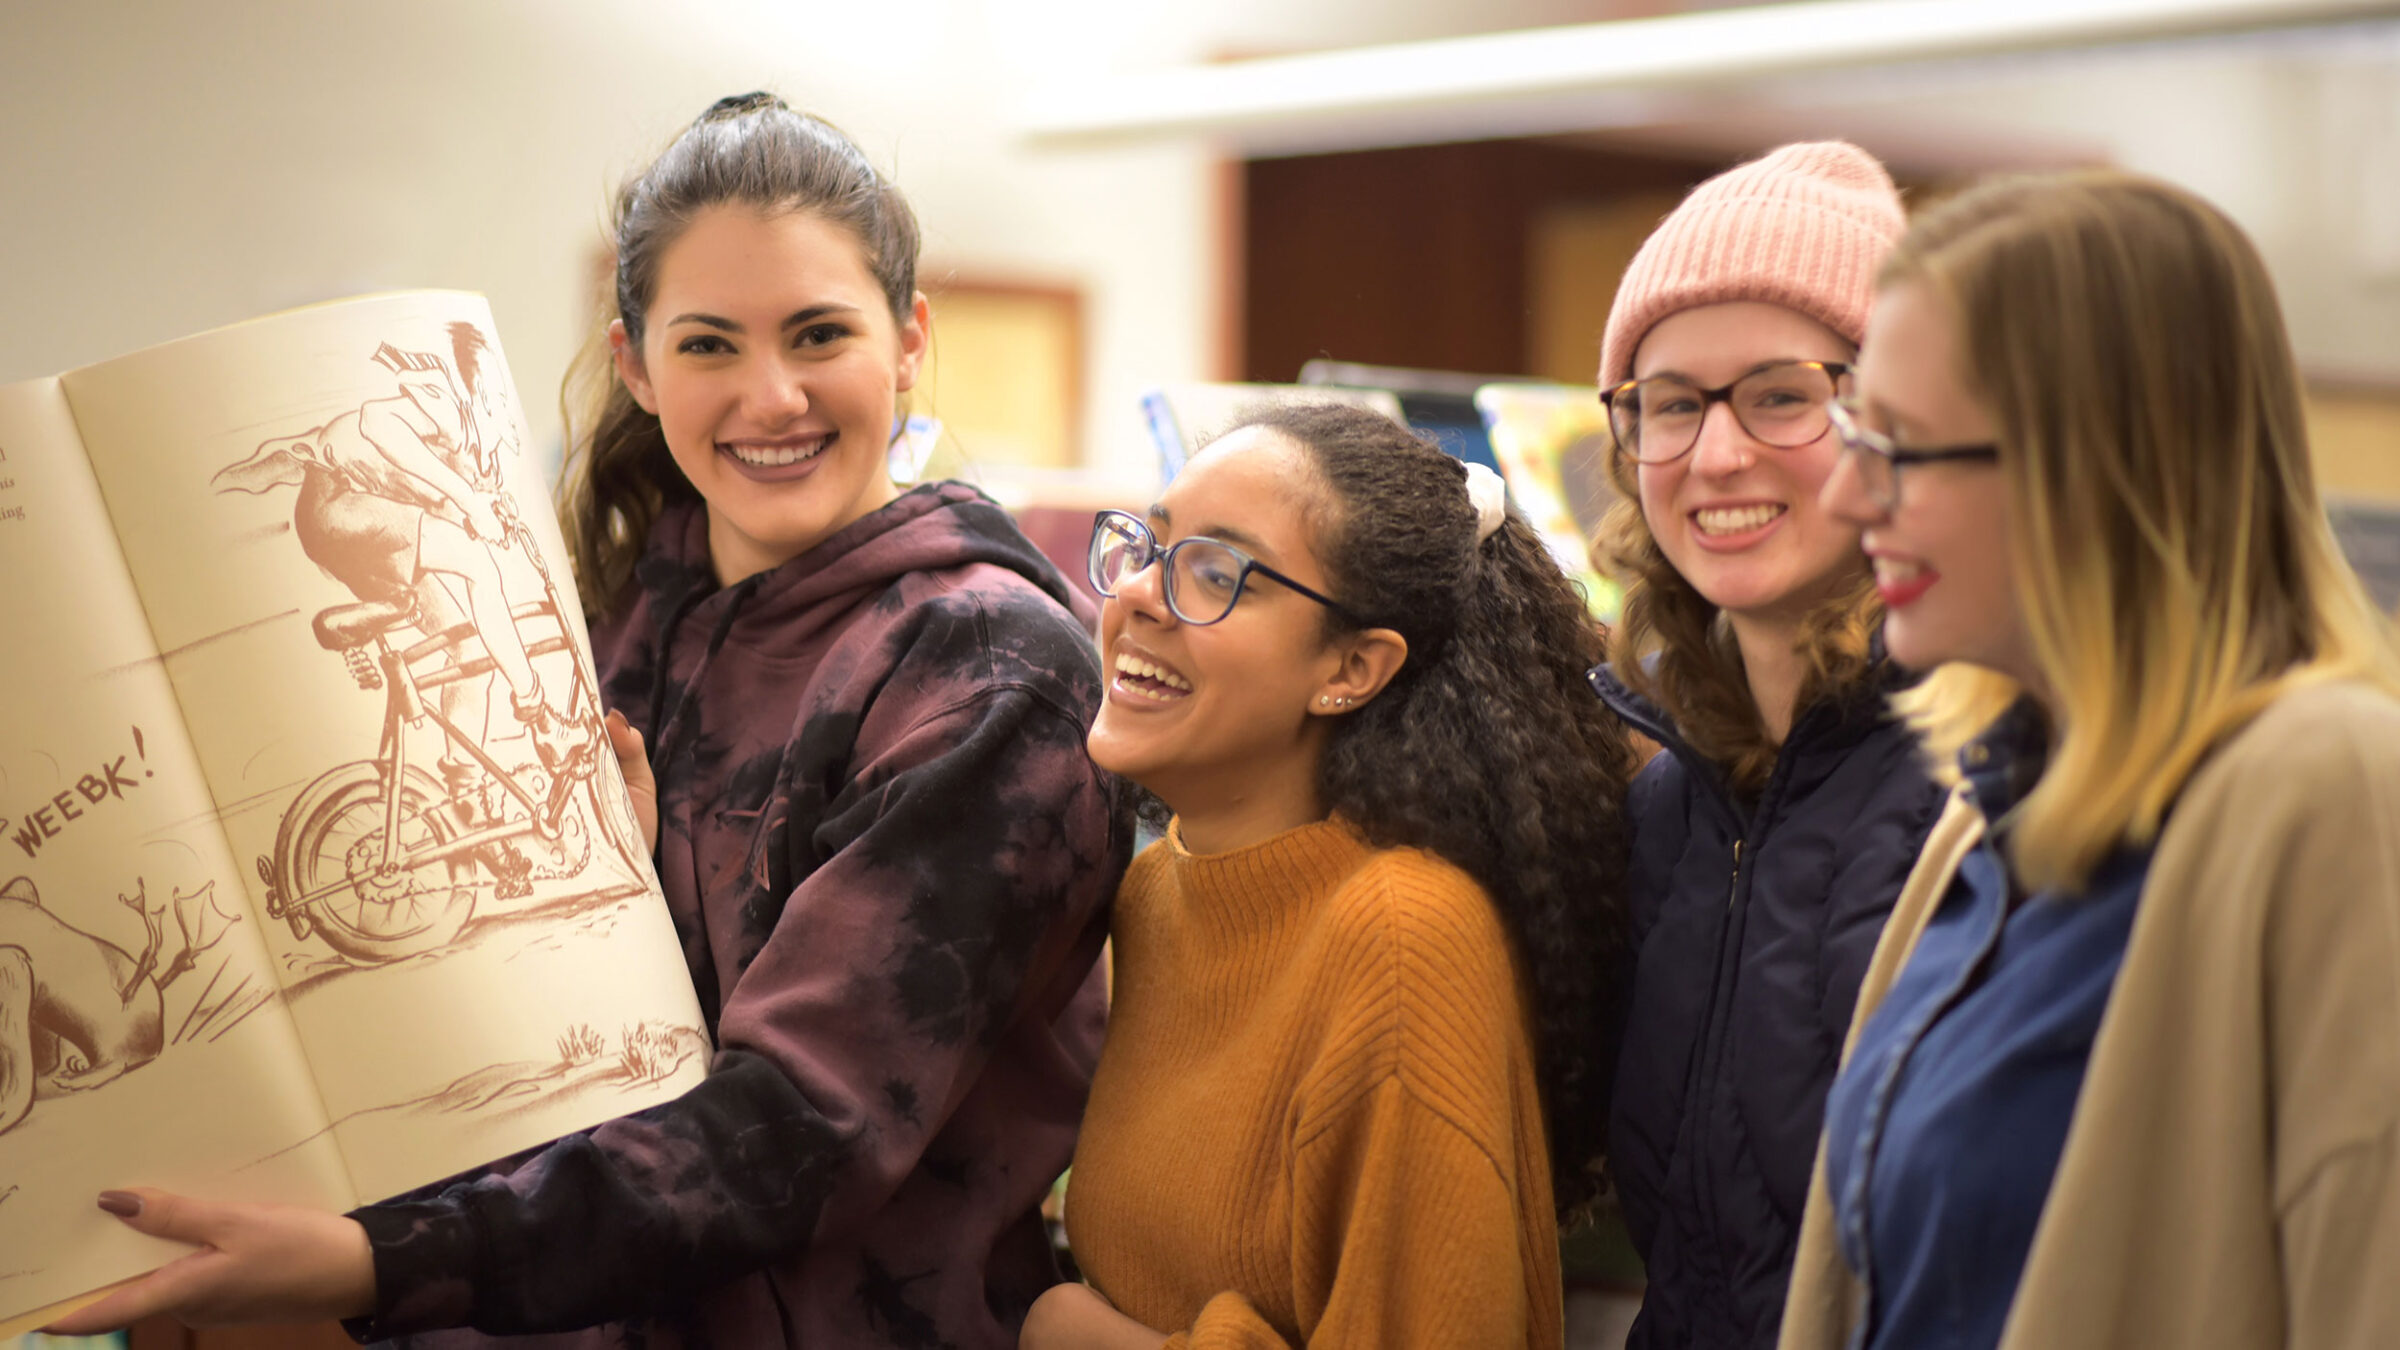 Four students look at an illustration book in the library